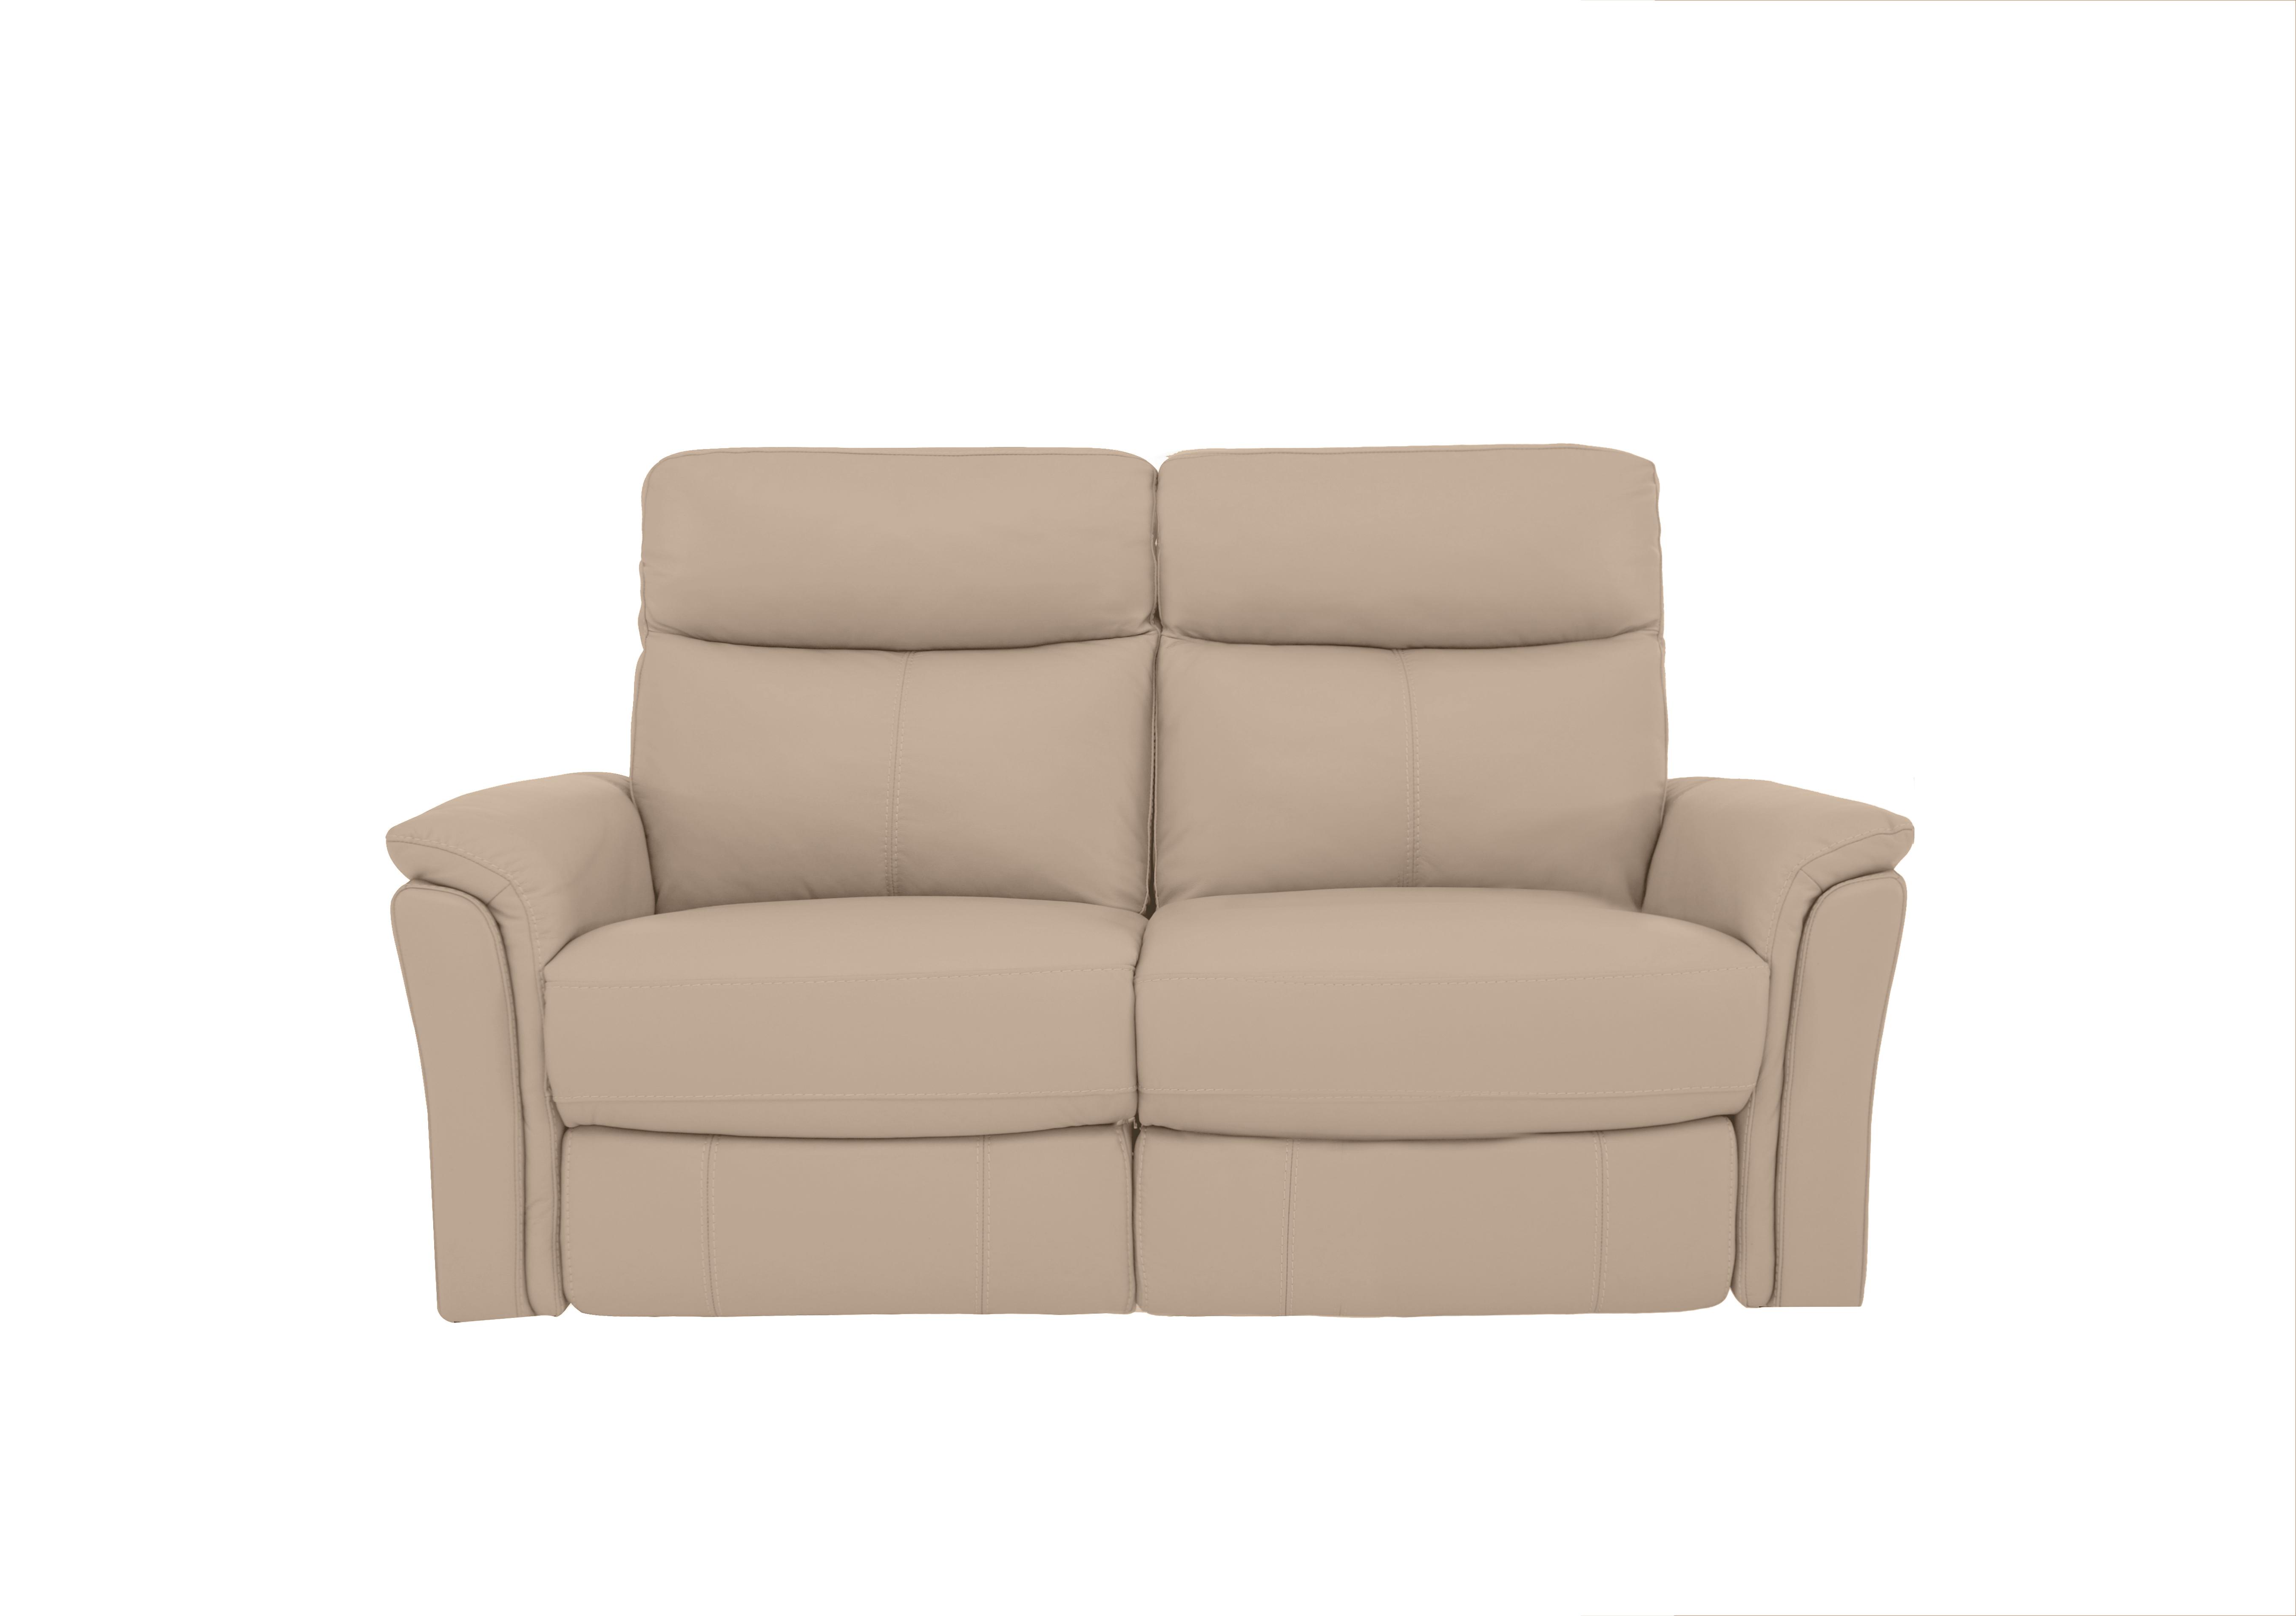 Compact Collection Piccolo 2 Seater Sofa in Bv-039c Pebble on Furniture Village